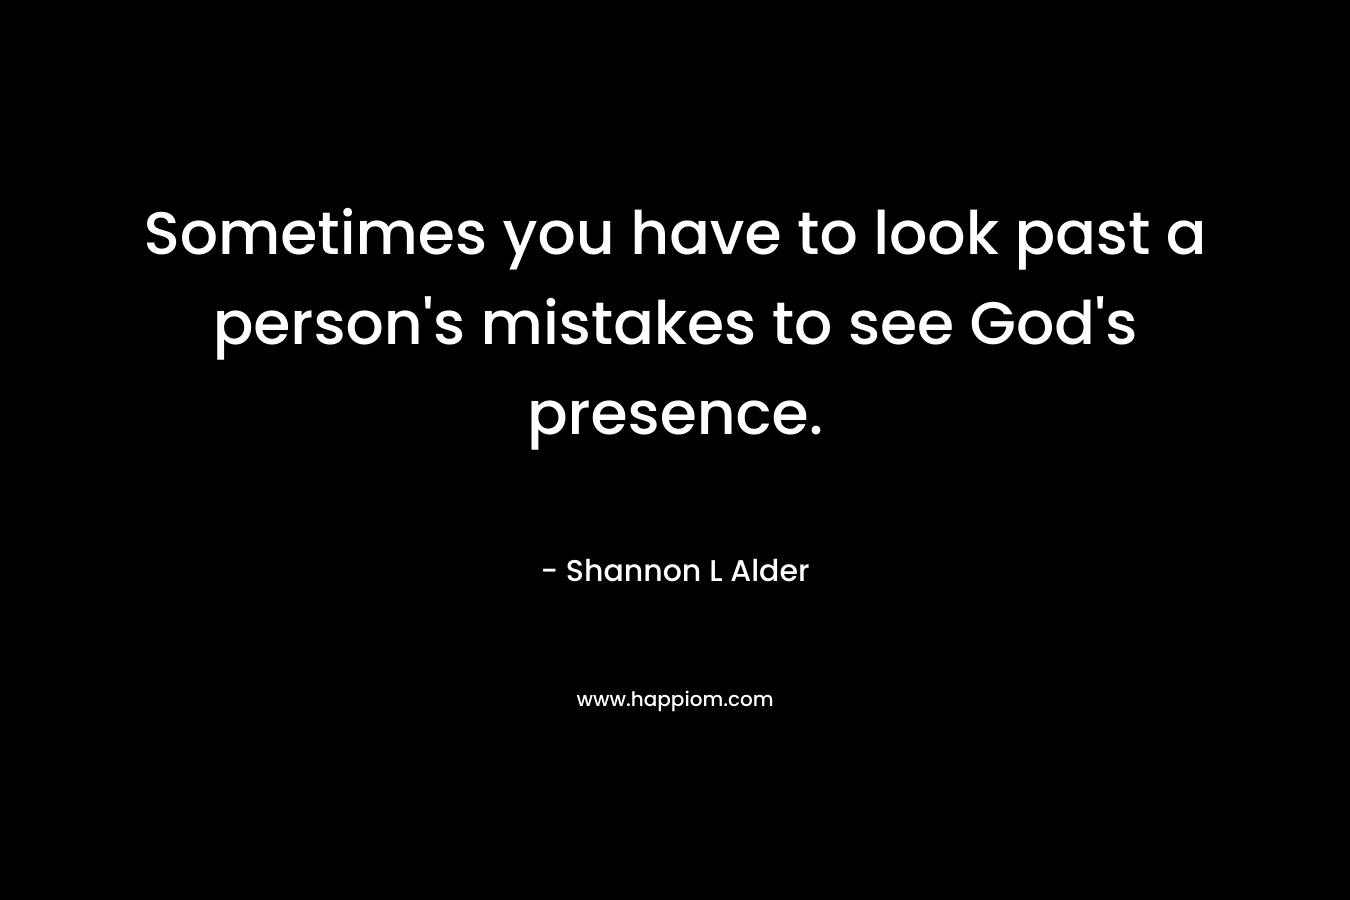 Sometimes you have to look past a person's mistakes to see God's presence.